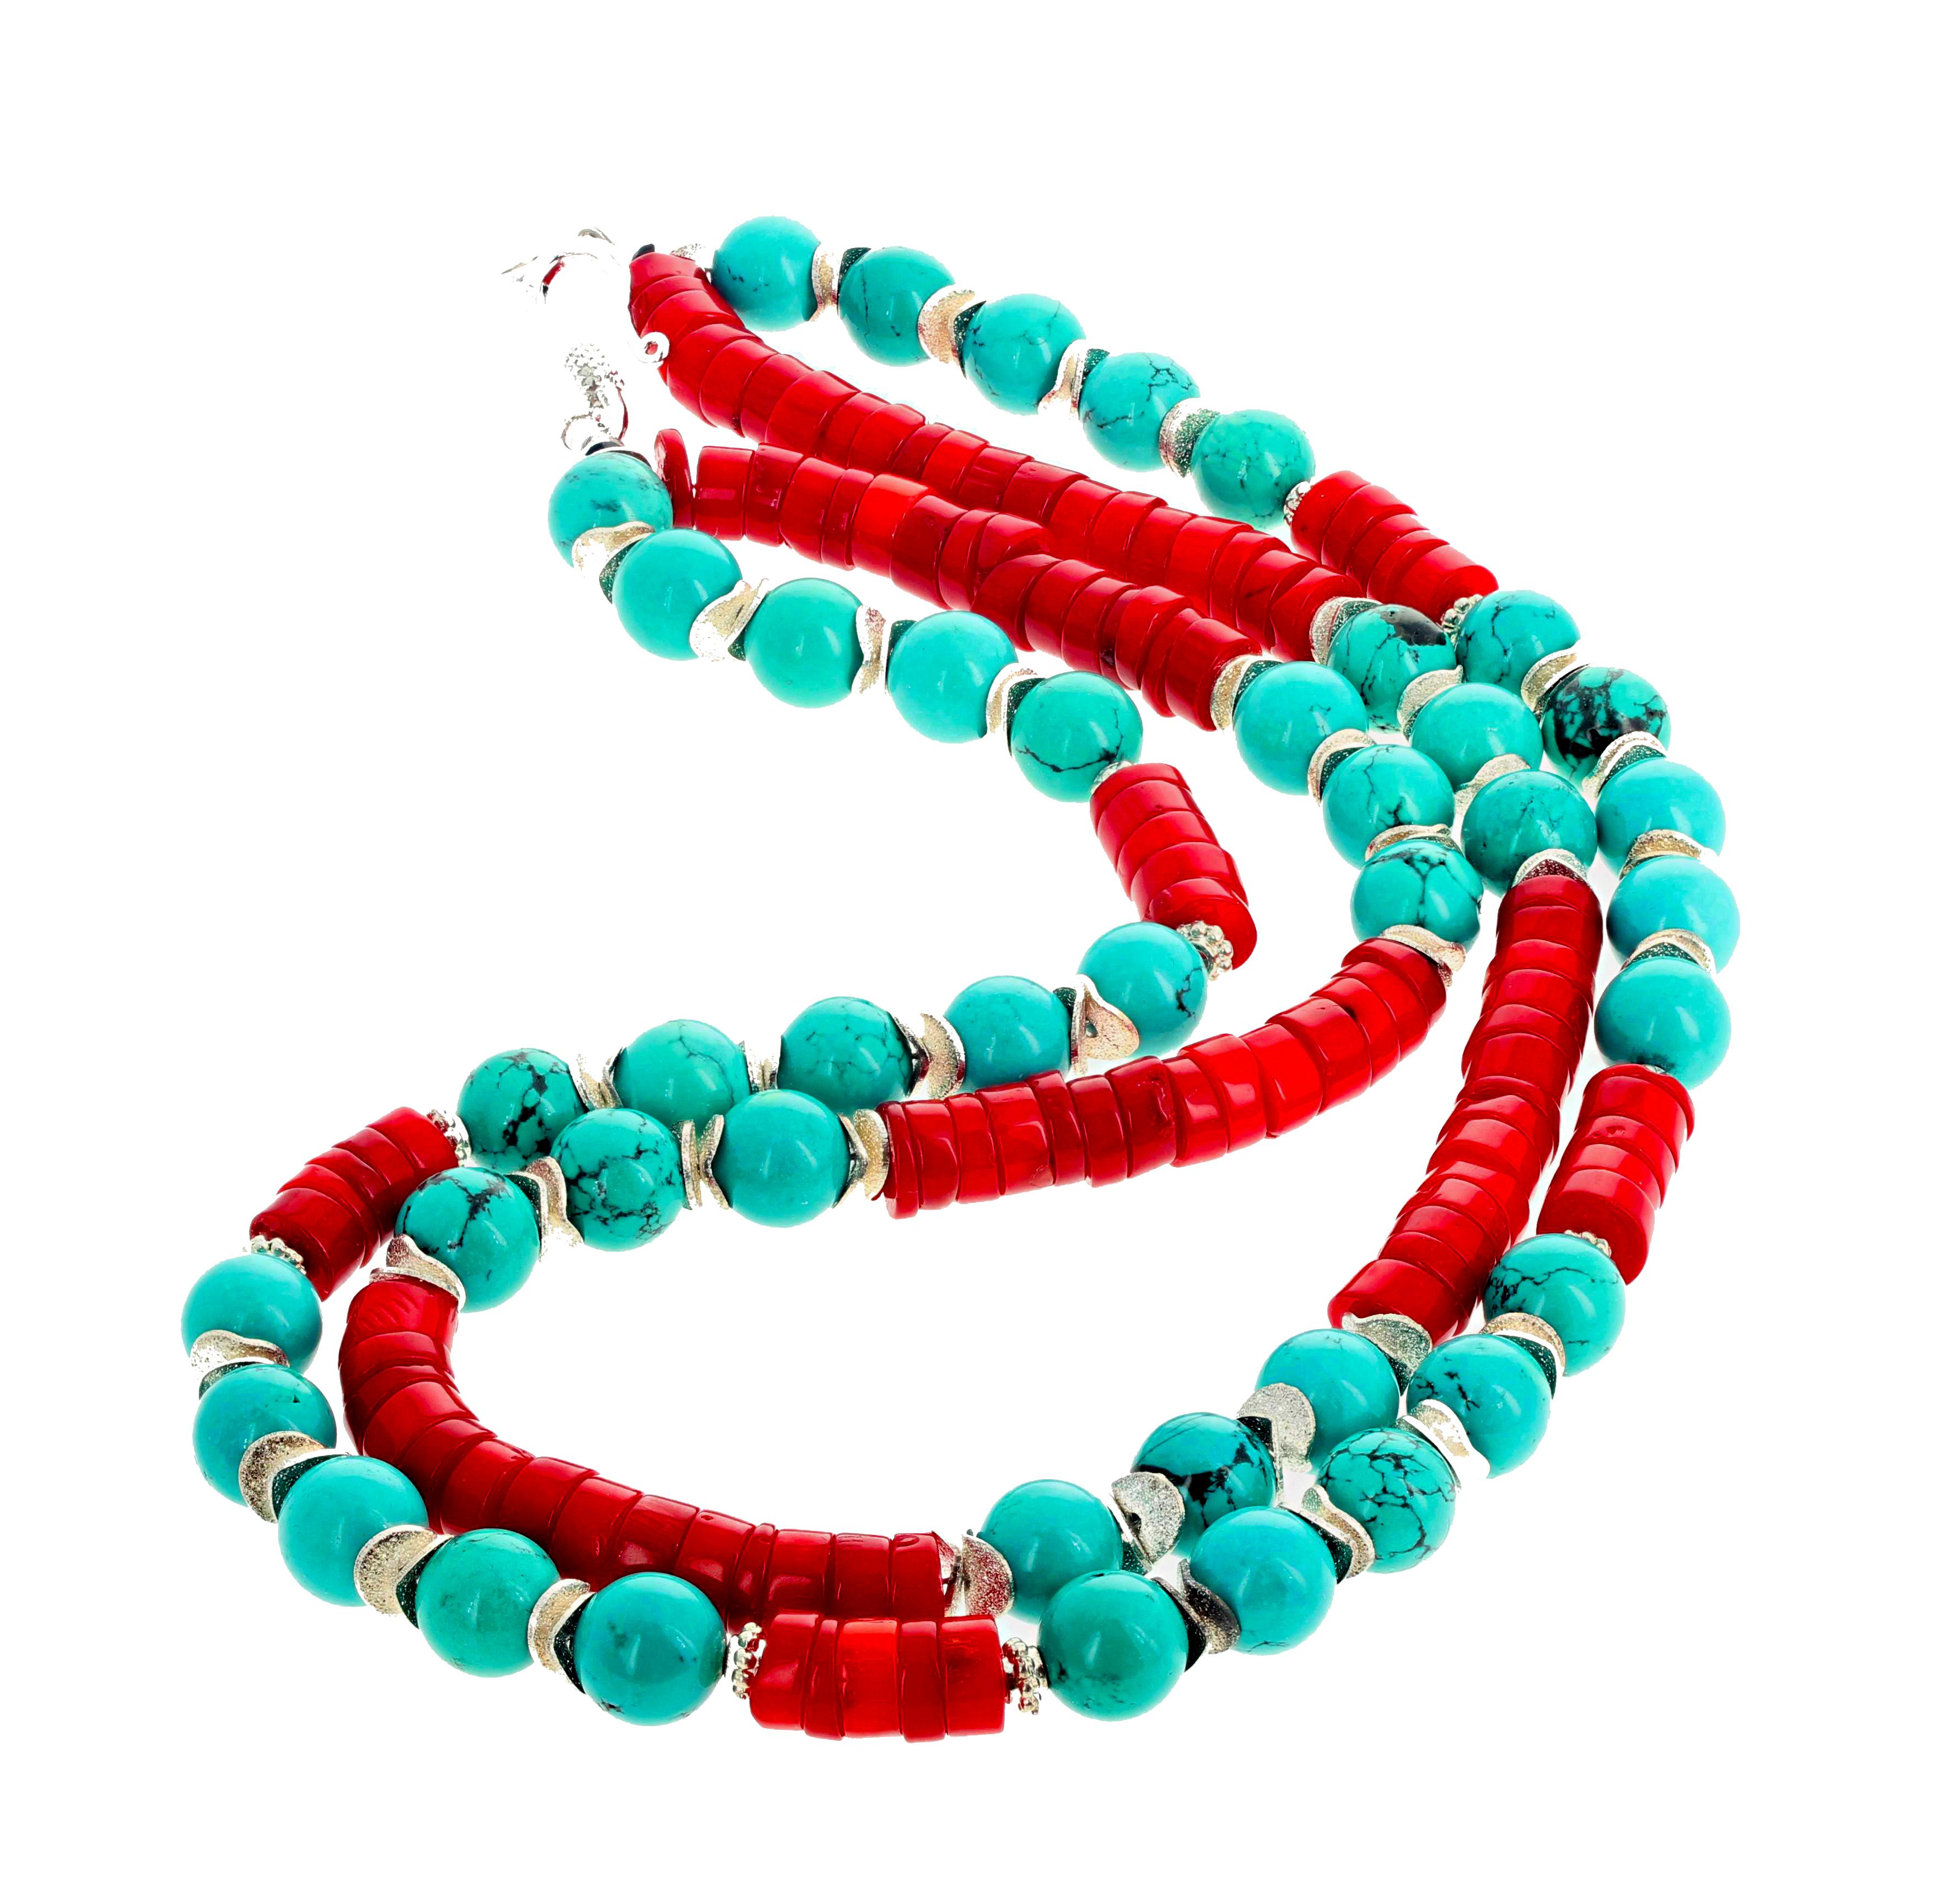 Gemjunky BoHo Chic Turquoise and Red Bamboo Coral Double Strand Necklace (Gemischter Schliff)